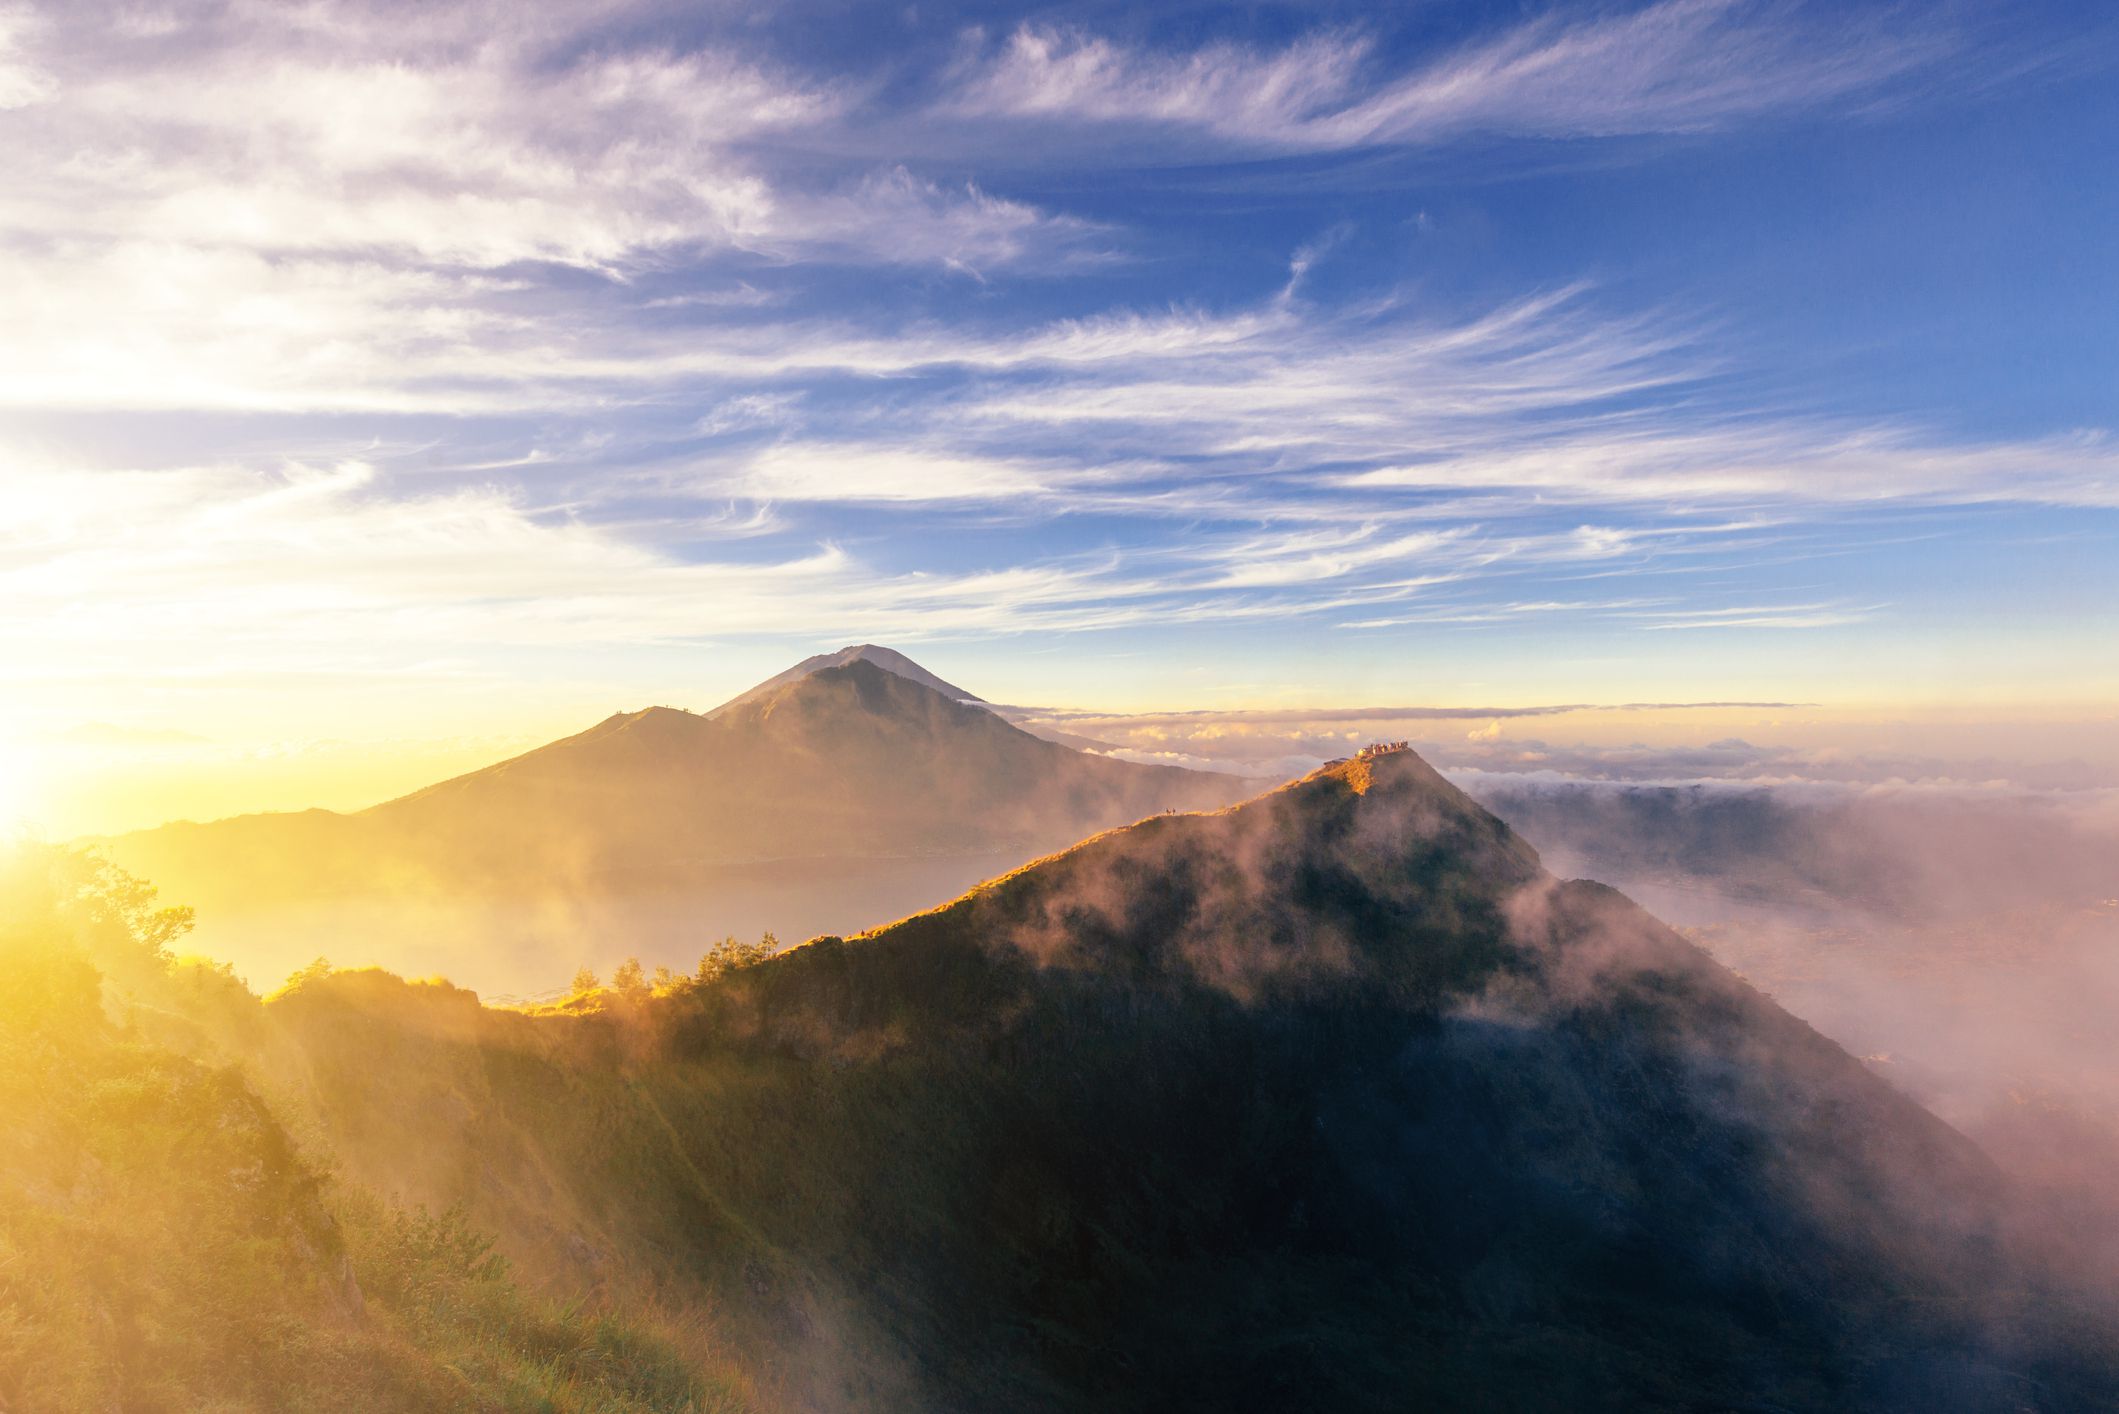 <p><b>Bali, Indonesia<br>Elevation:</b> 5,633 feet<br>The peak of <a href="https://en.unesco.org/global-geoparks/batur">Mount Batur</a> is undoubtedly one of Bali's most scenic attractions, and it's easy to understand why — a blend of green palm trees, white beaches, and a turquoise-blue sea, it's hard to beat. However, you should be prepared for the journey up the mountain: High temperatures mean that most tours start before dawn. Once you're there, you'll be rewarded with some of the island's most spectacular views.    </p><p><b>Related:</b> <a href="https://blog.cheapism.com/overcrowded-tourist-destinations/">24 Beautiful Destinations Threatened By Overtourism — and Where to Go Instead</a></p>